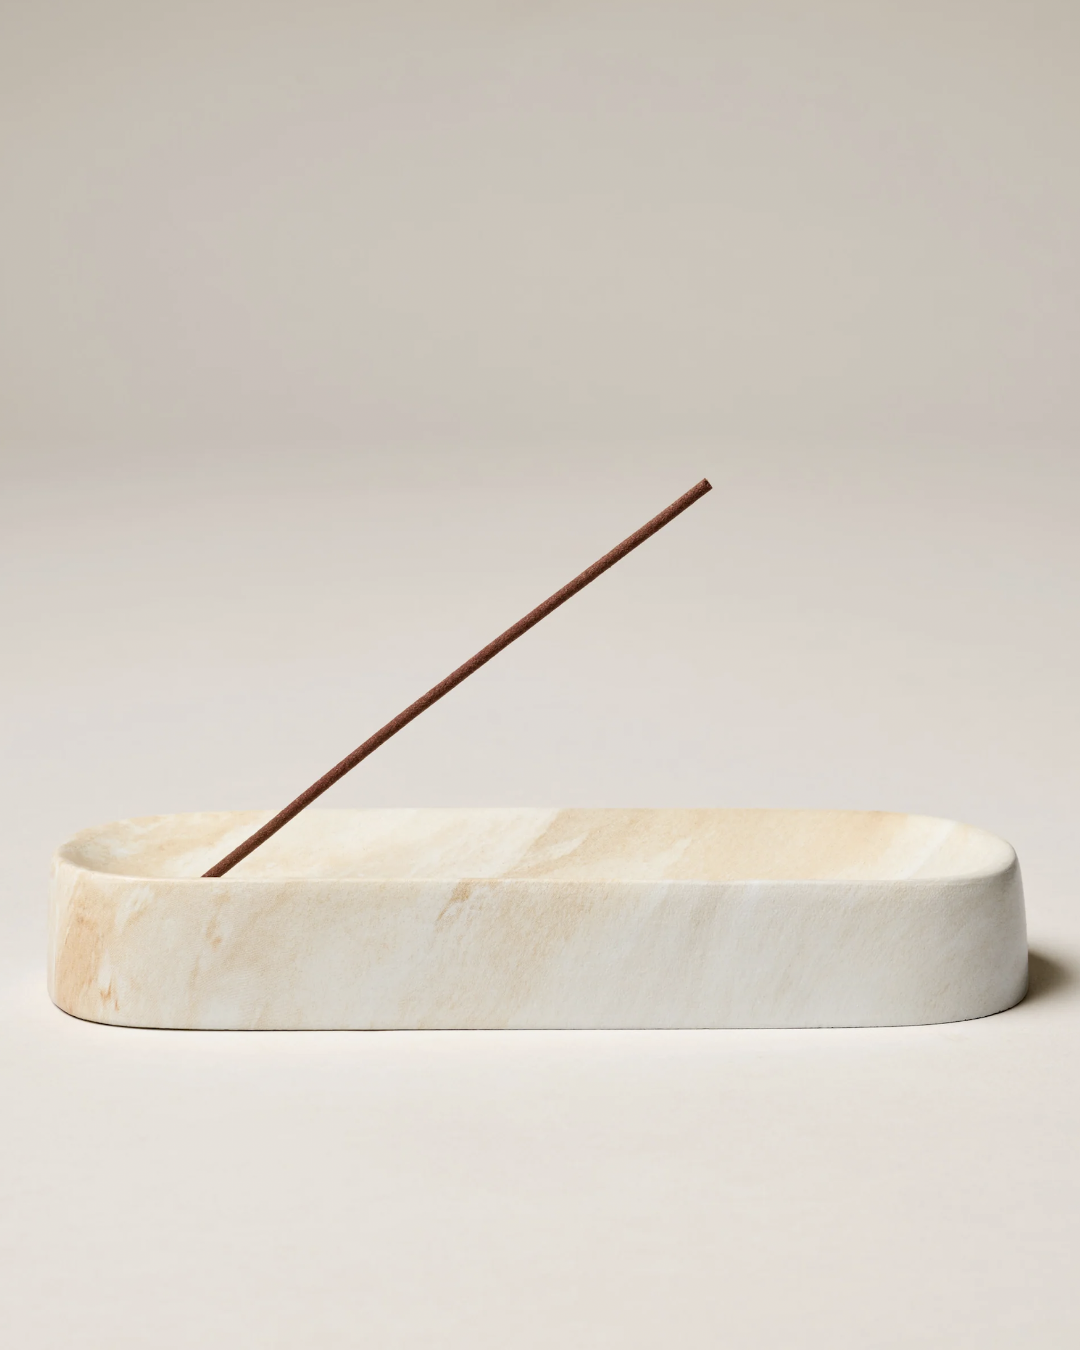 Ceramic Incense Holder - White Incense and Burners by Gentle Habits - Prae Wellness